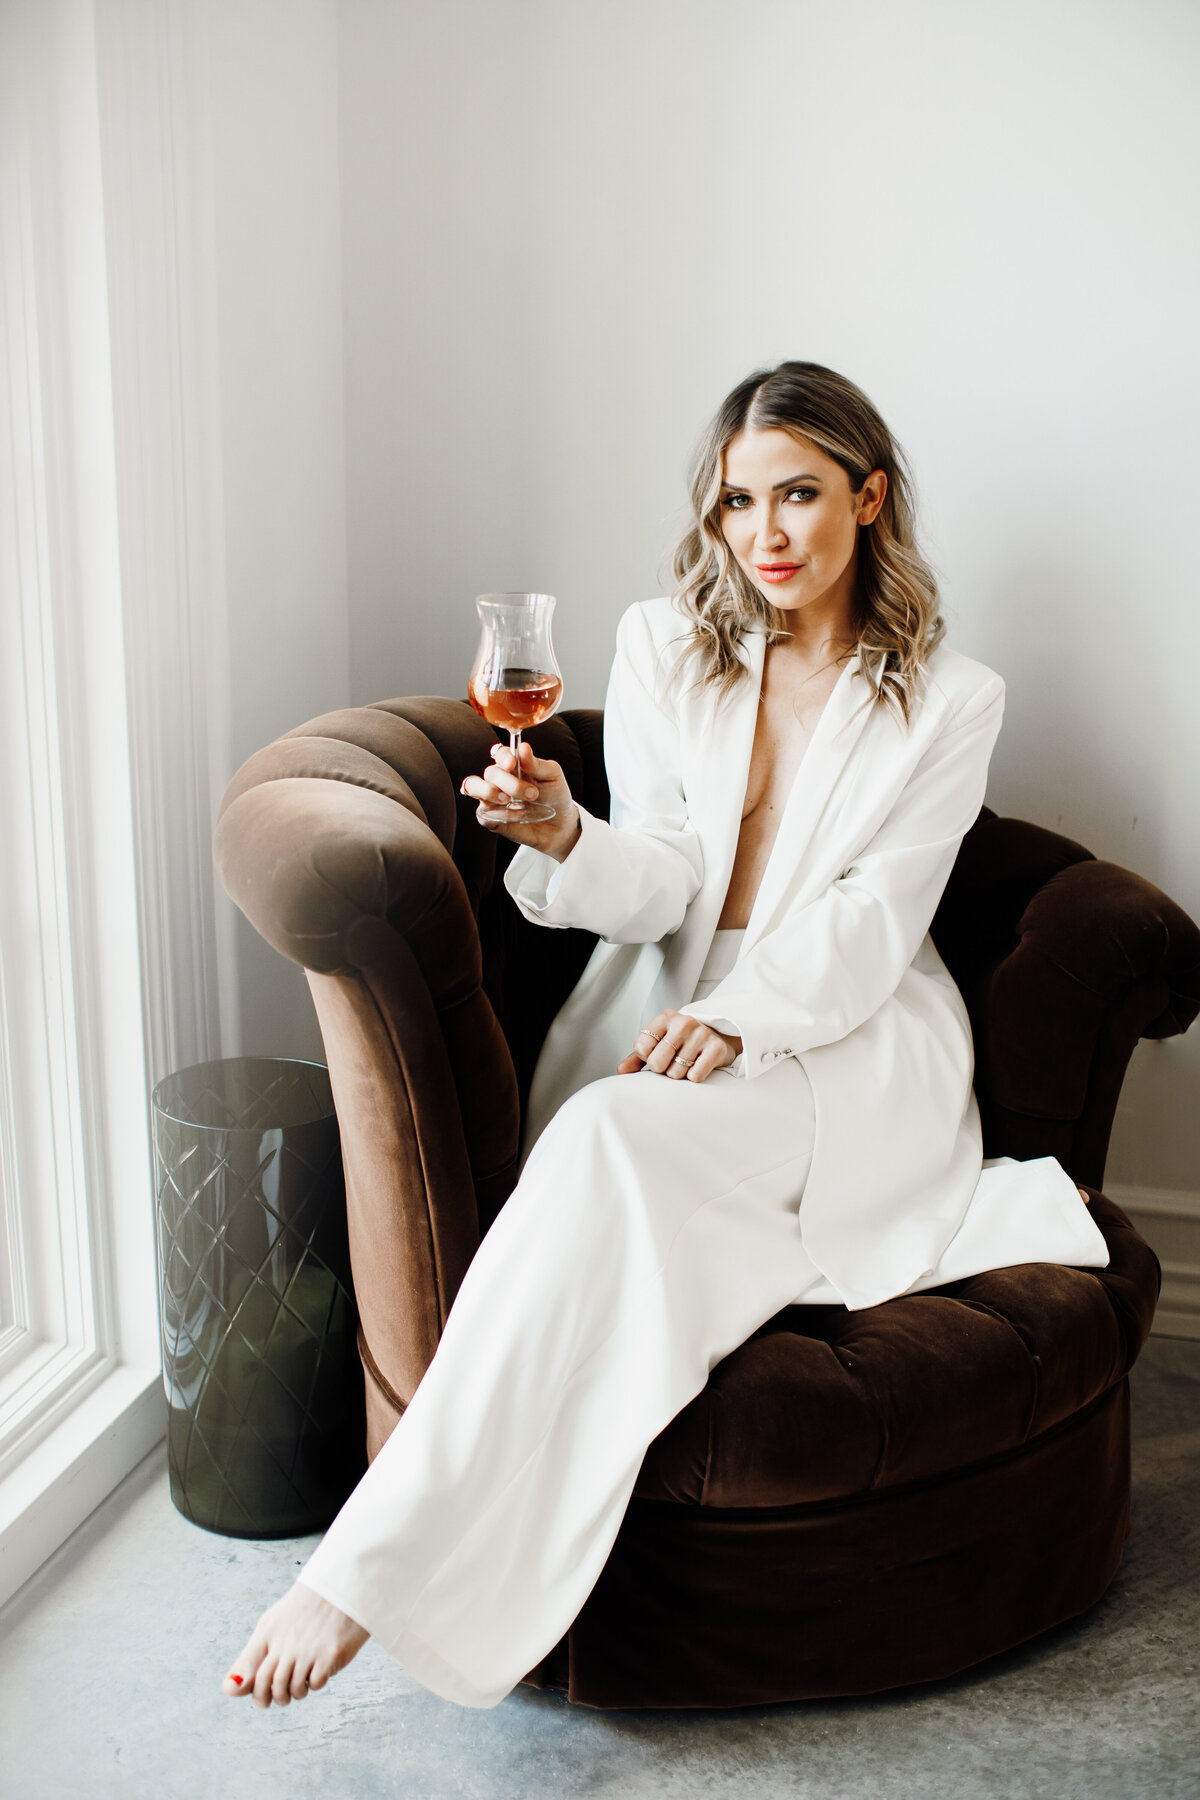 Kaitlyn Bristowe Spade & Sparrow all white clothes sitting in chair